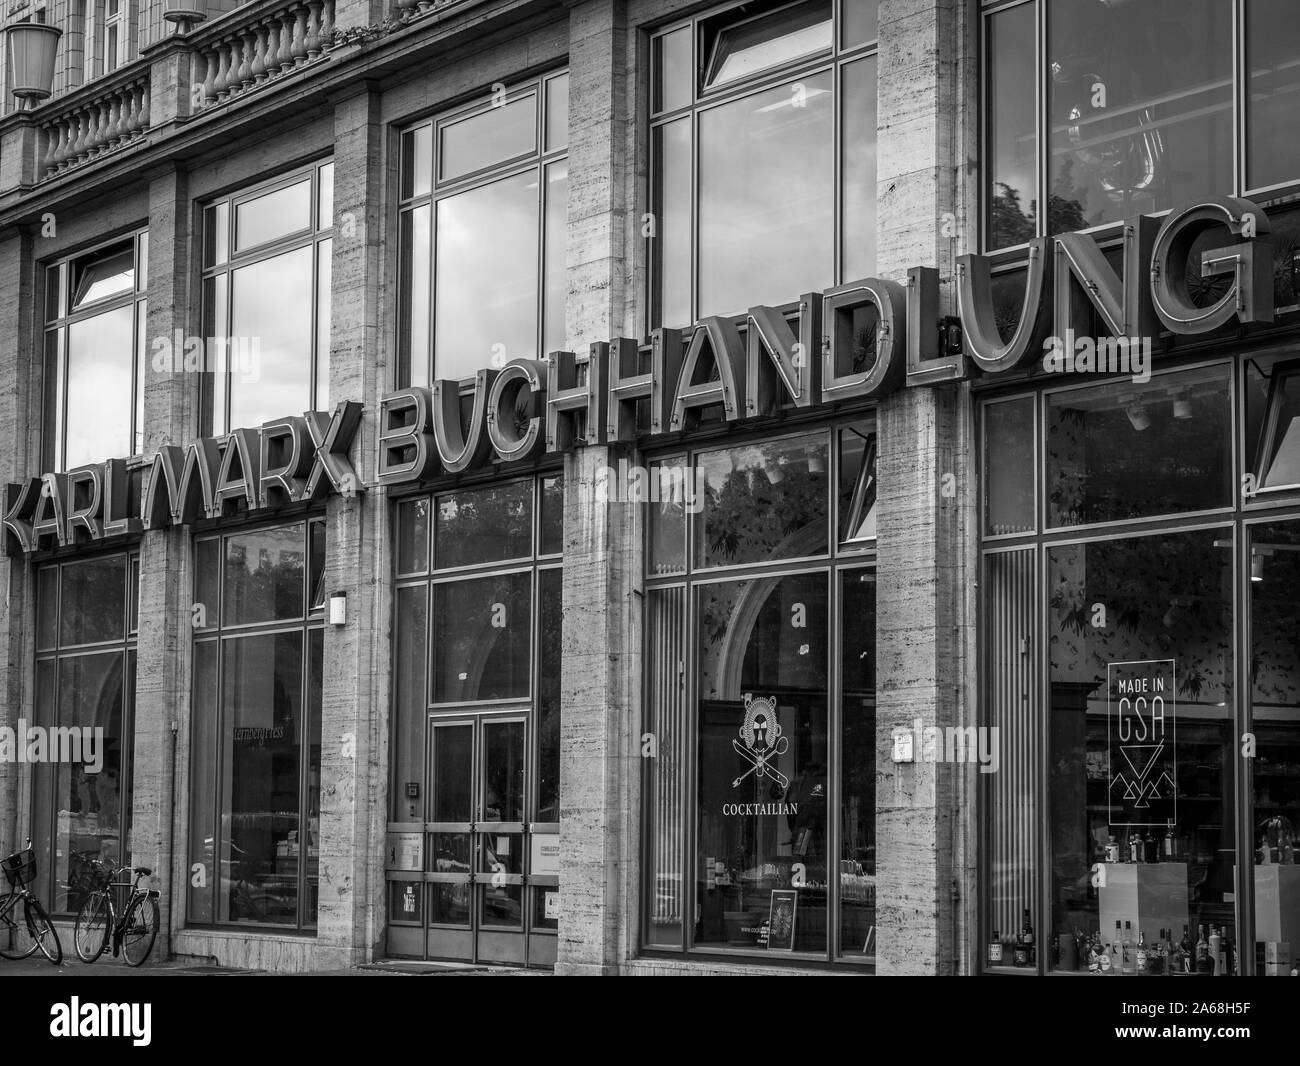 Old Karl Marx bookshop at Karl Marx avenue in Berlin Friedrichshain, East Germany, former GDR, oblique view with letttering, black and white Stock Photo